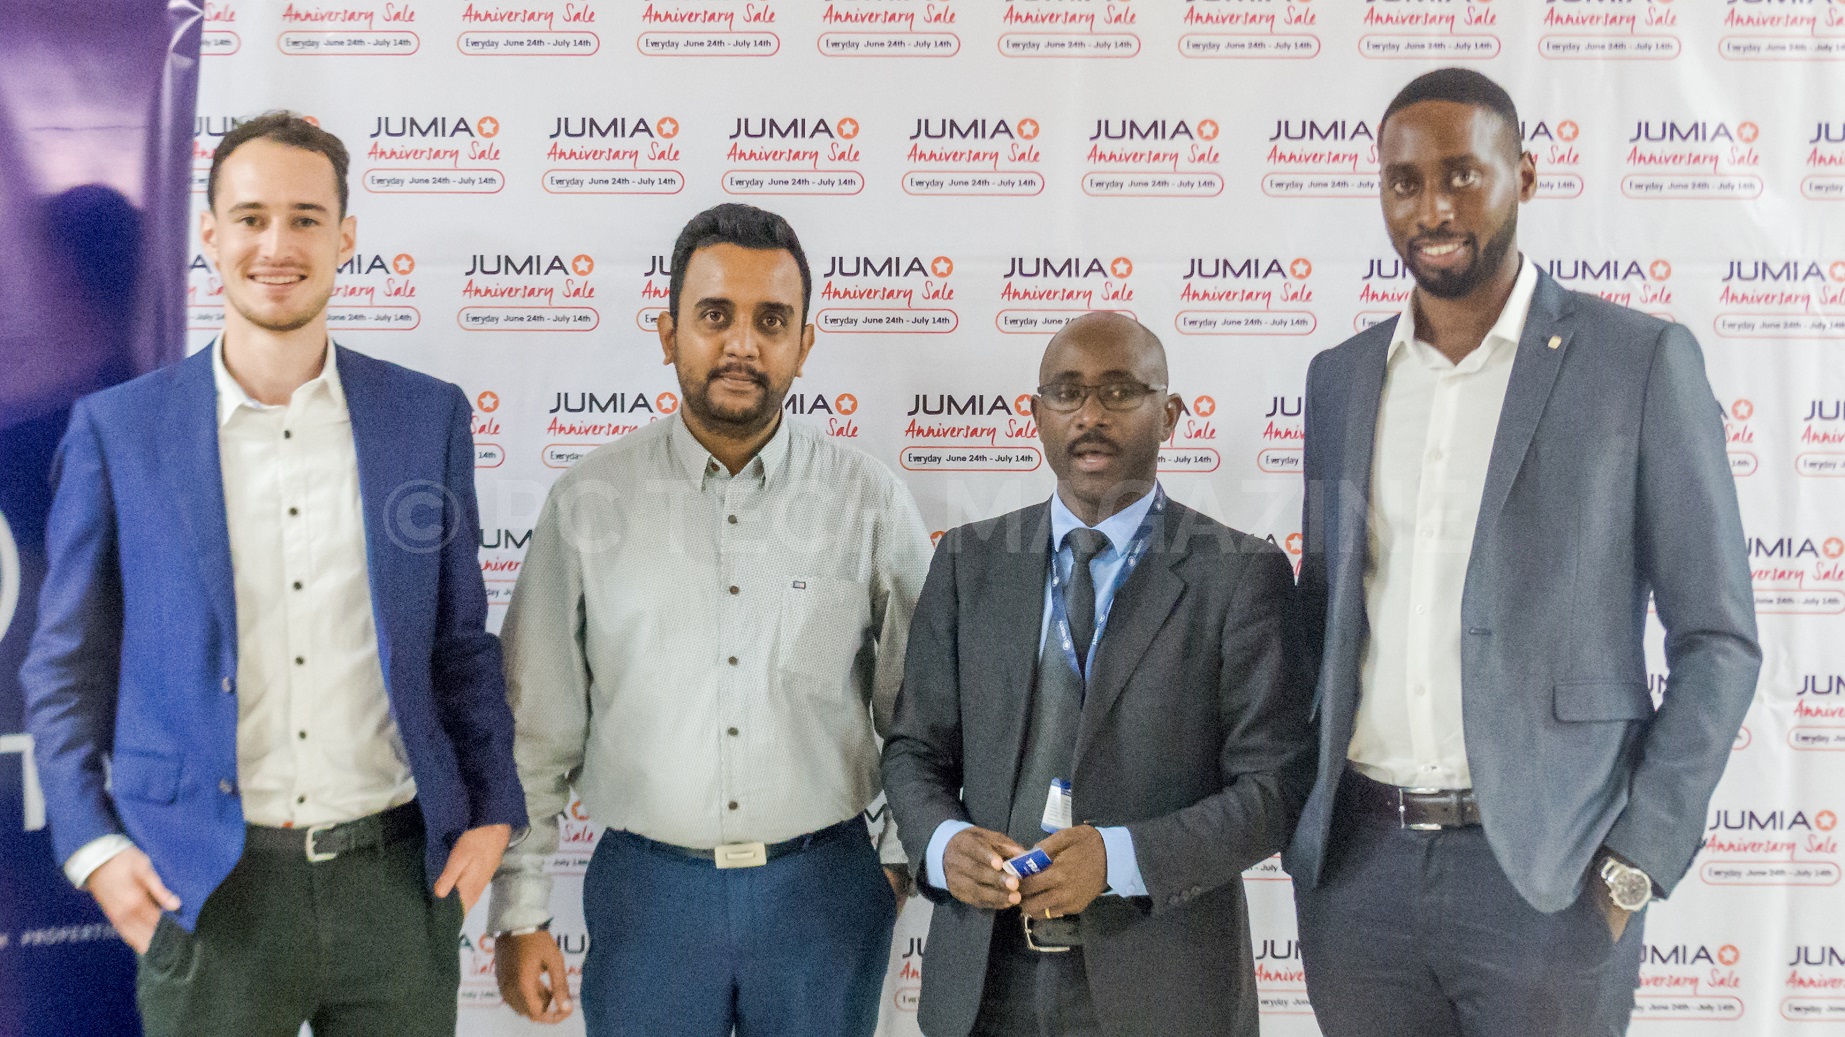 Paul Tesar, Head of Growth Jumia Uganda (L) and Ron Kawamara, Jumia Uganda CEO (R) pose for a group photo with their partners from Liberty Insurance (2nd right) and Transtel (2nd left) at the launch of their anniversary celebration at Hotel Africana on Tuesday 18th, June 2019.